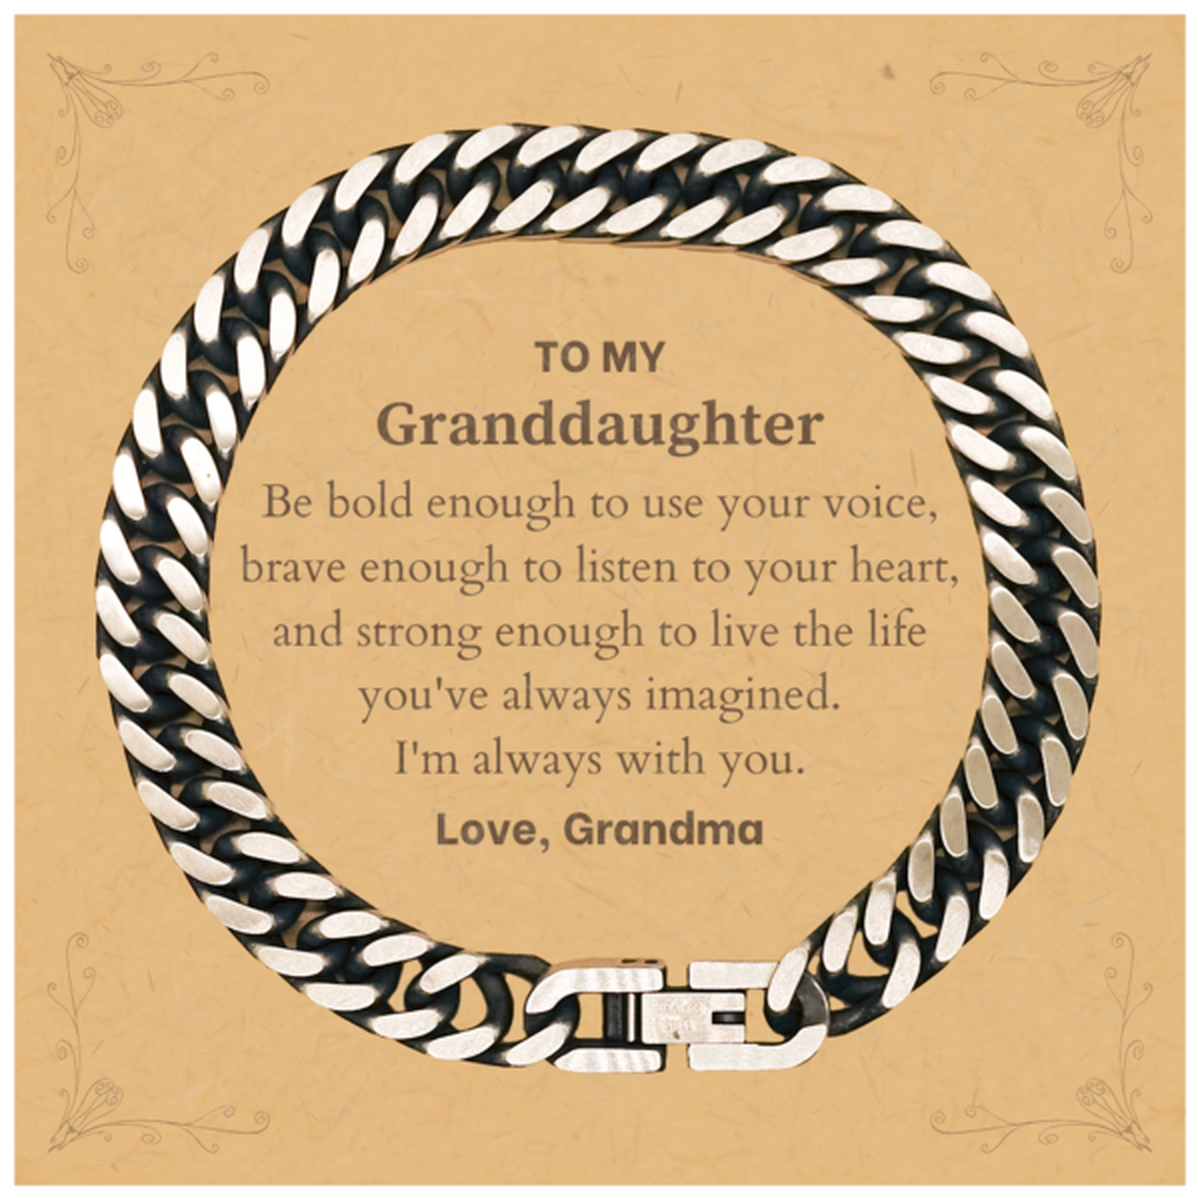 Keepsake Granddaughter Cuban Link Chain Bracelet Gift Idea Graduation Christmas Birthday Granddaughter from Grandma, Granddaughter Be bold enough to use your voice, brave enough to listen to your heart. Love, Grandma